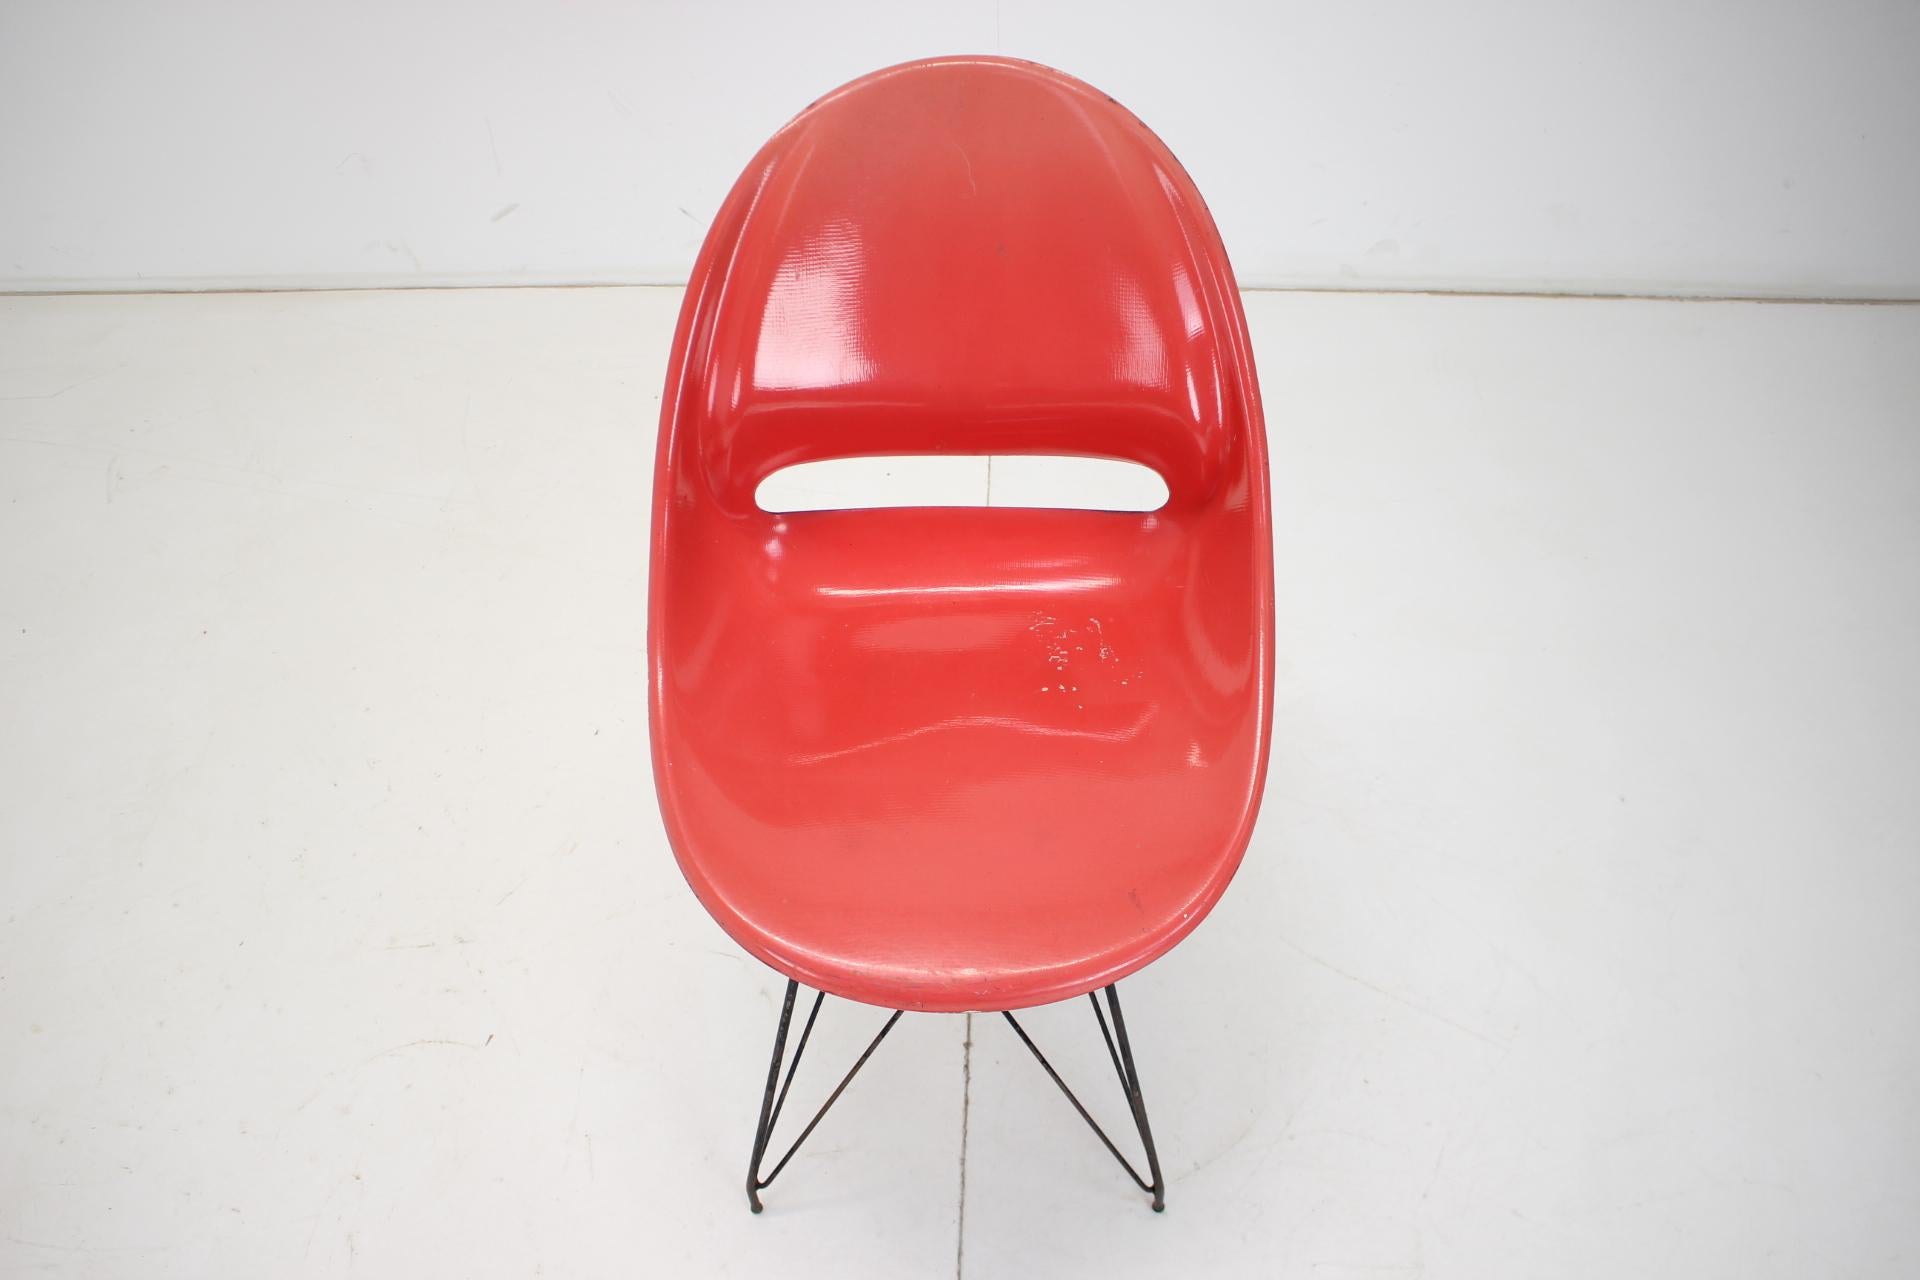 Mid-Century Modern Midcentury Red Design Fiberglass Dining Chairs by M.Navratil, 1960s For Sale